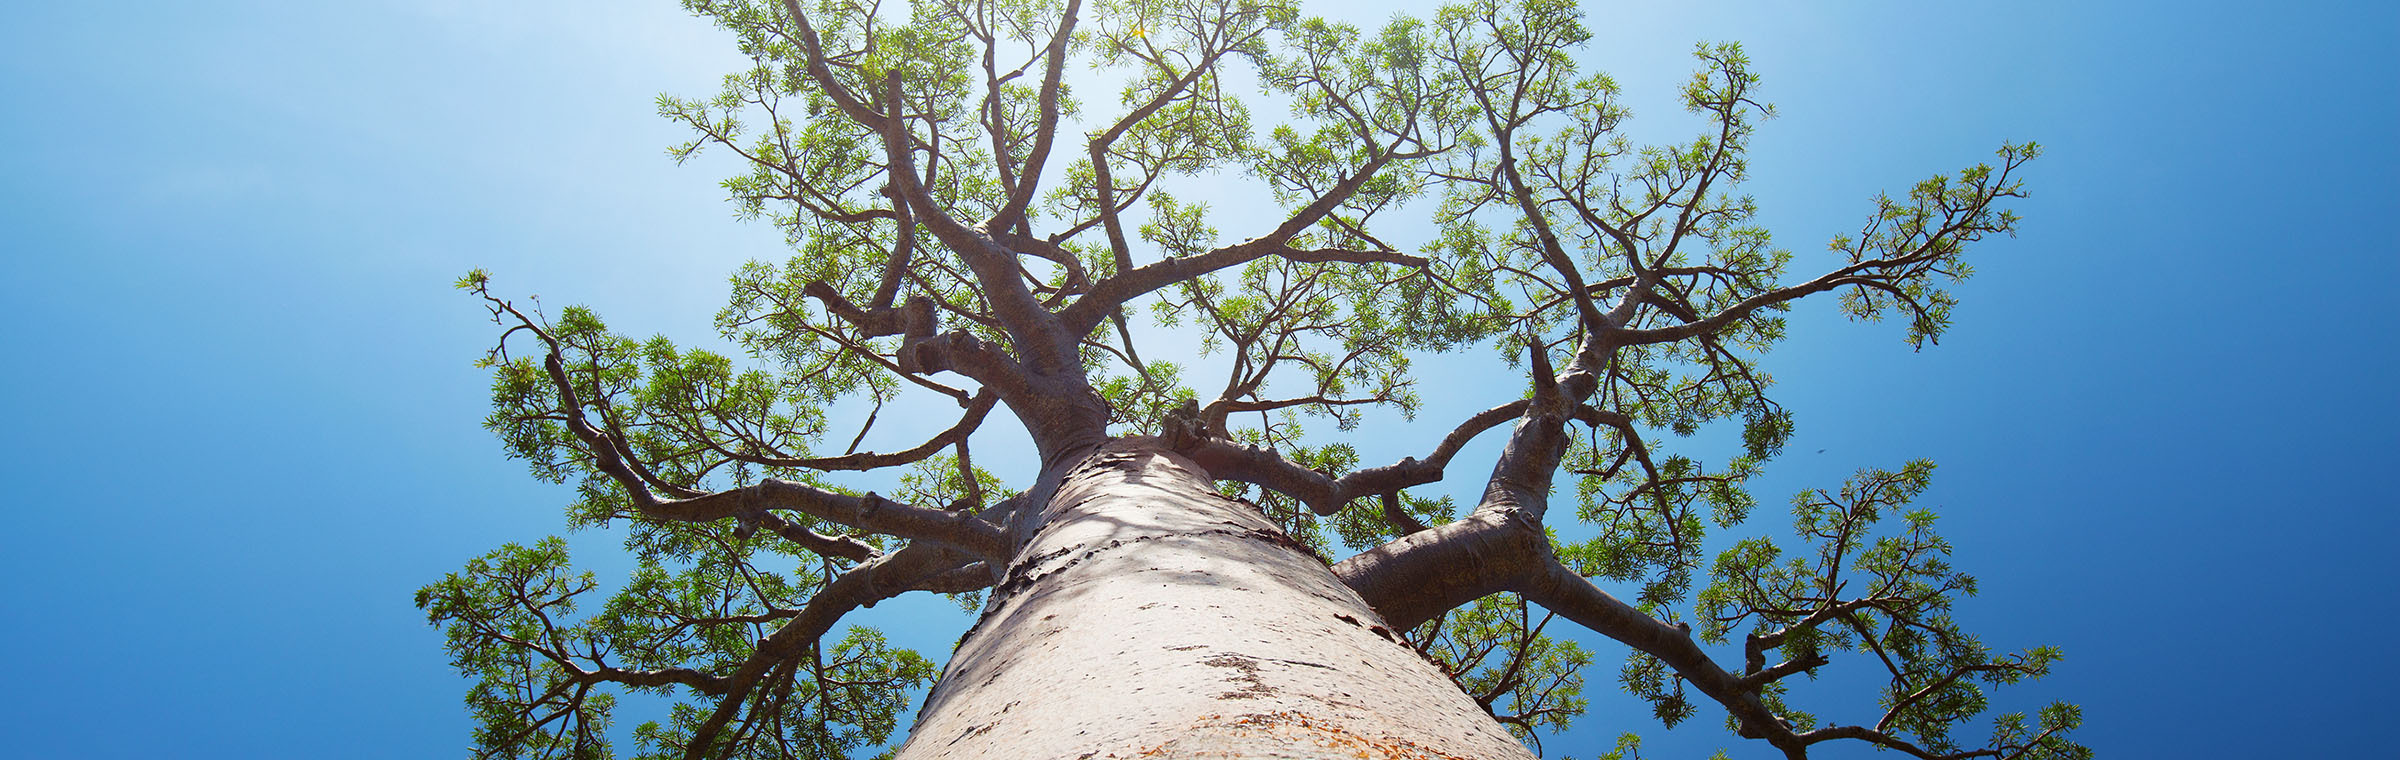 baobab tree with green leaves on a blue clear sky